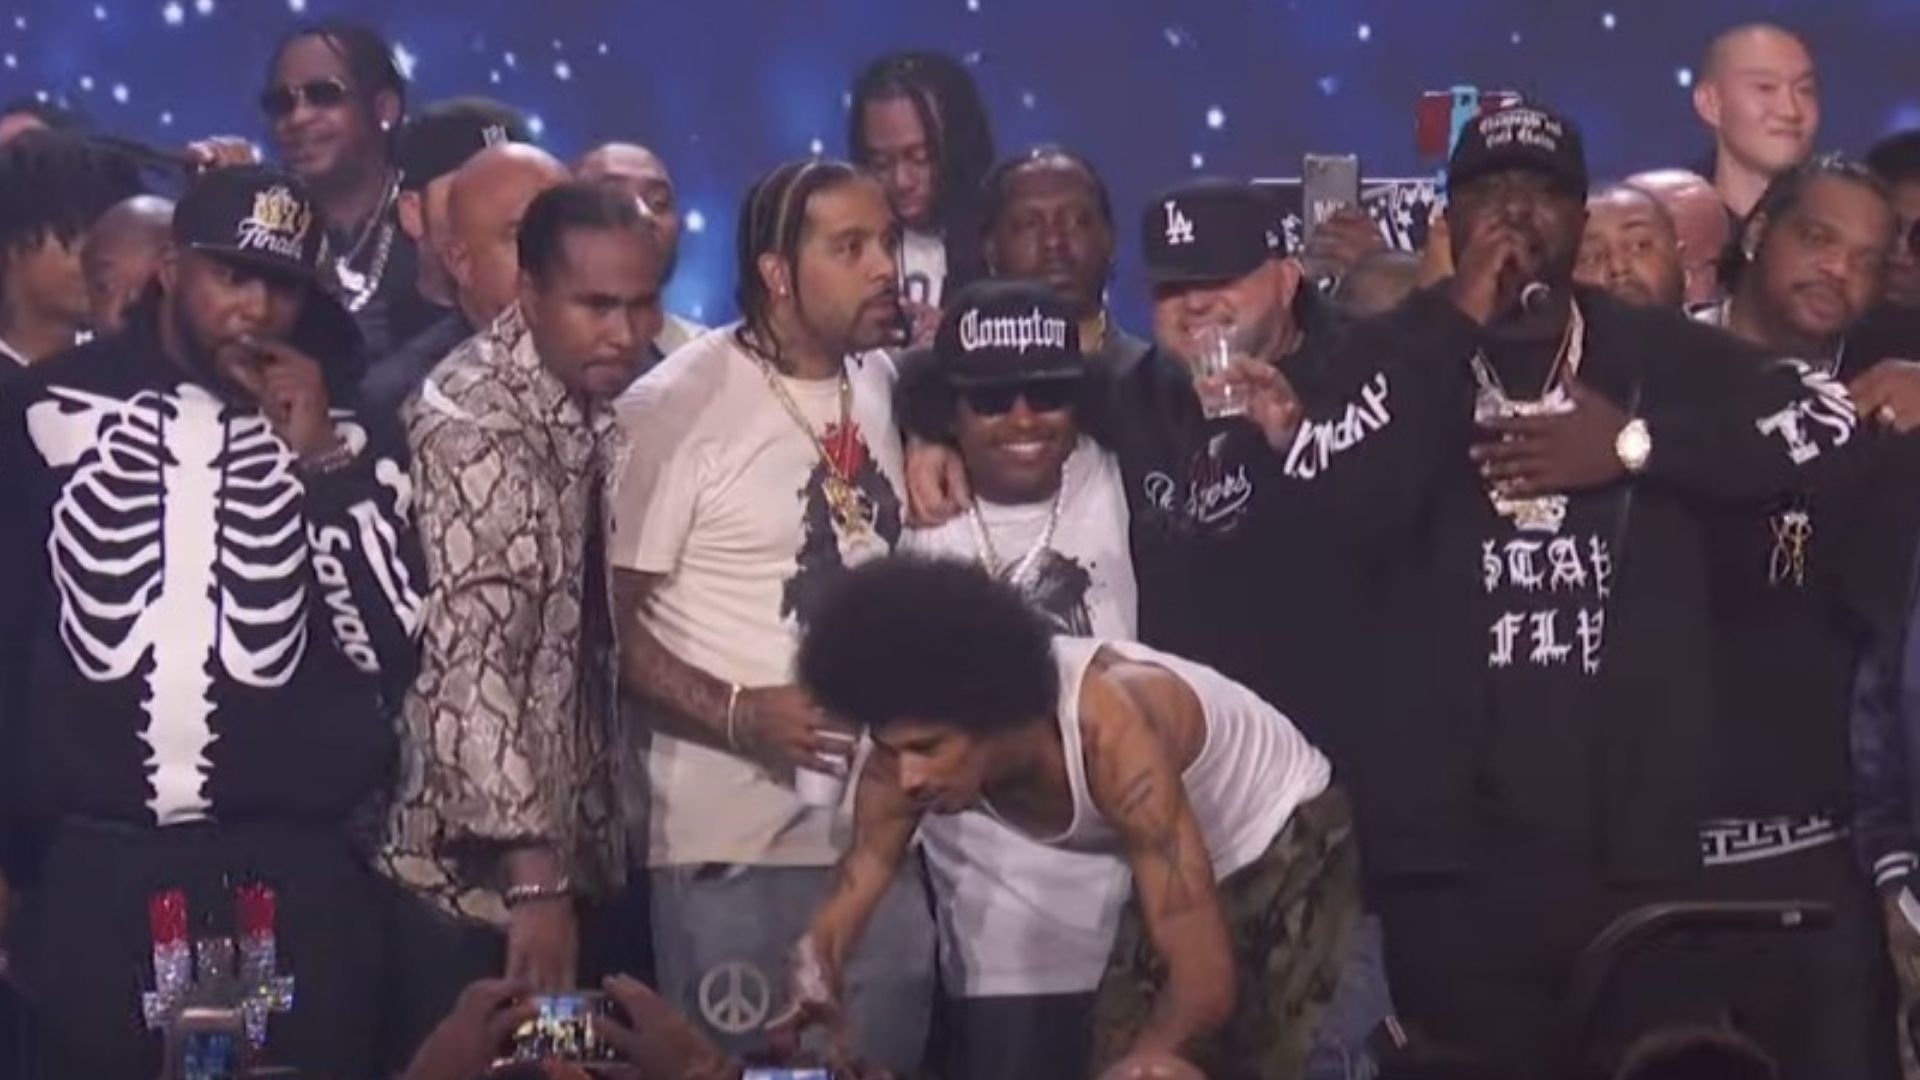 Fighting Erupts during the Verzuz Battle between Bone Thugs-N-Harmony and the Three 6 Mafia